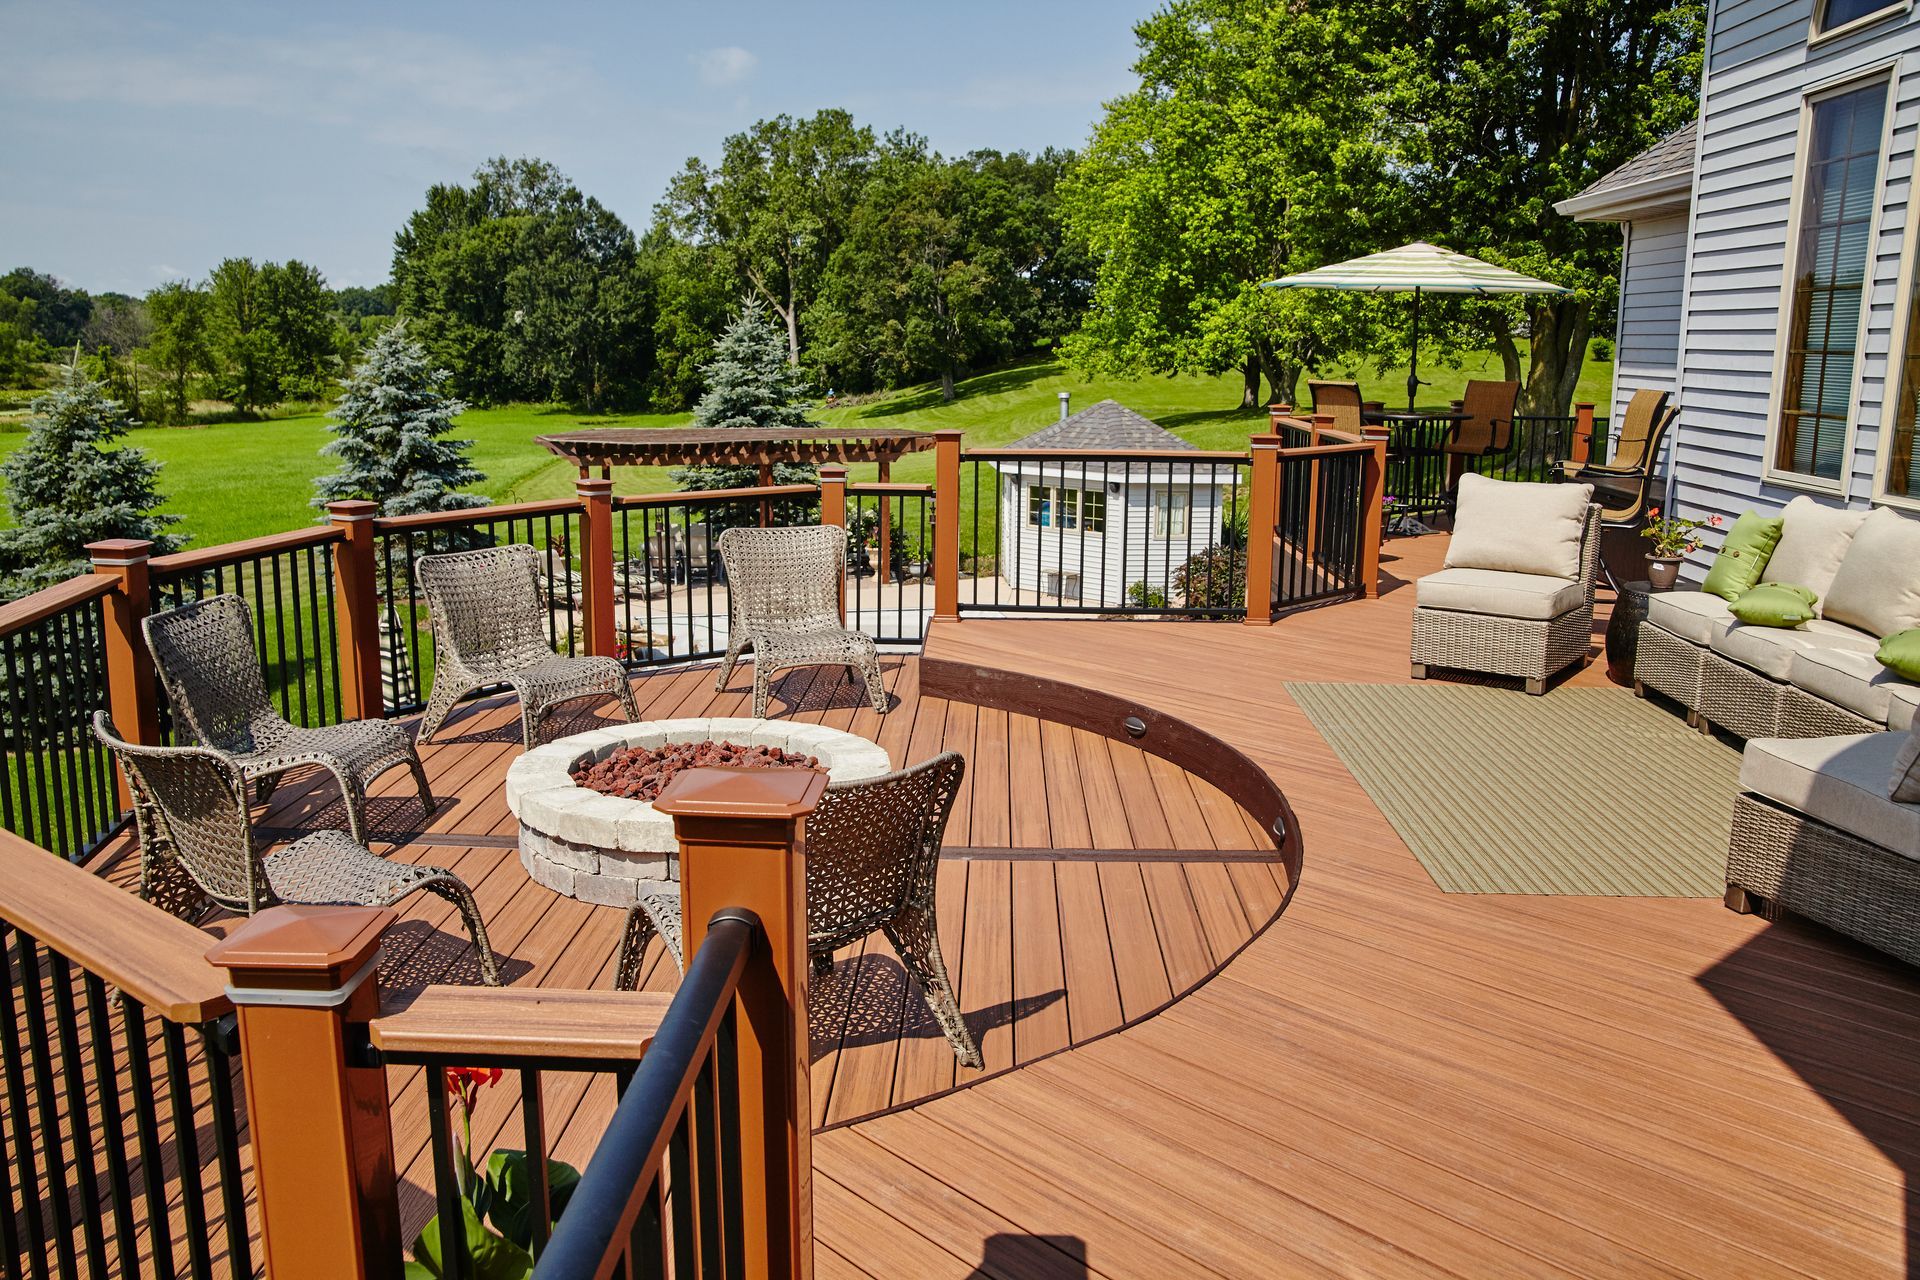 a large wooden deck with a fire pit in the middle